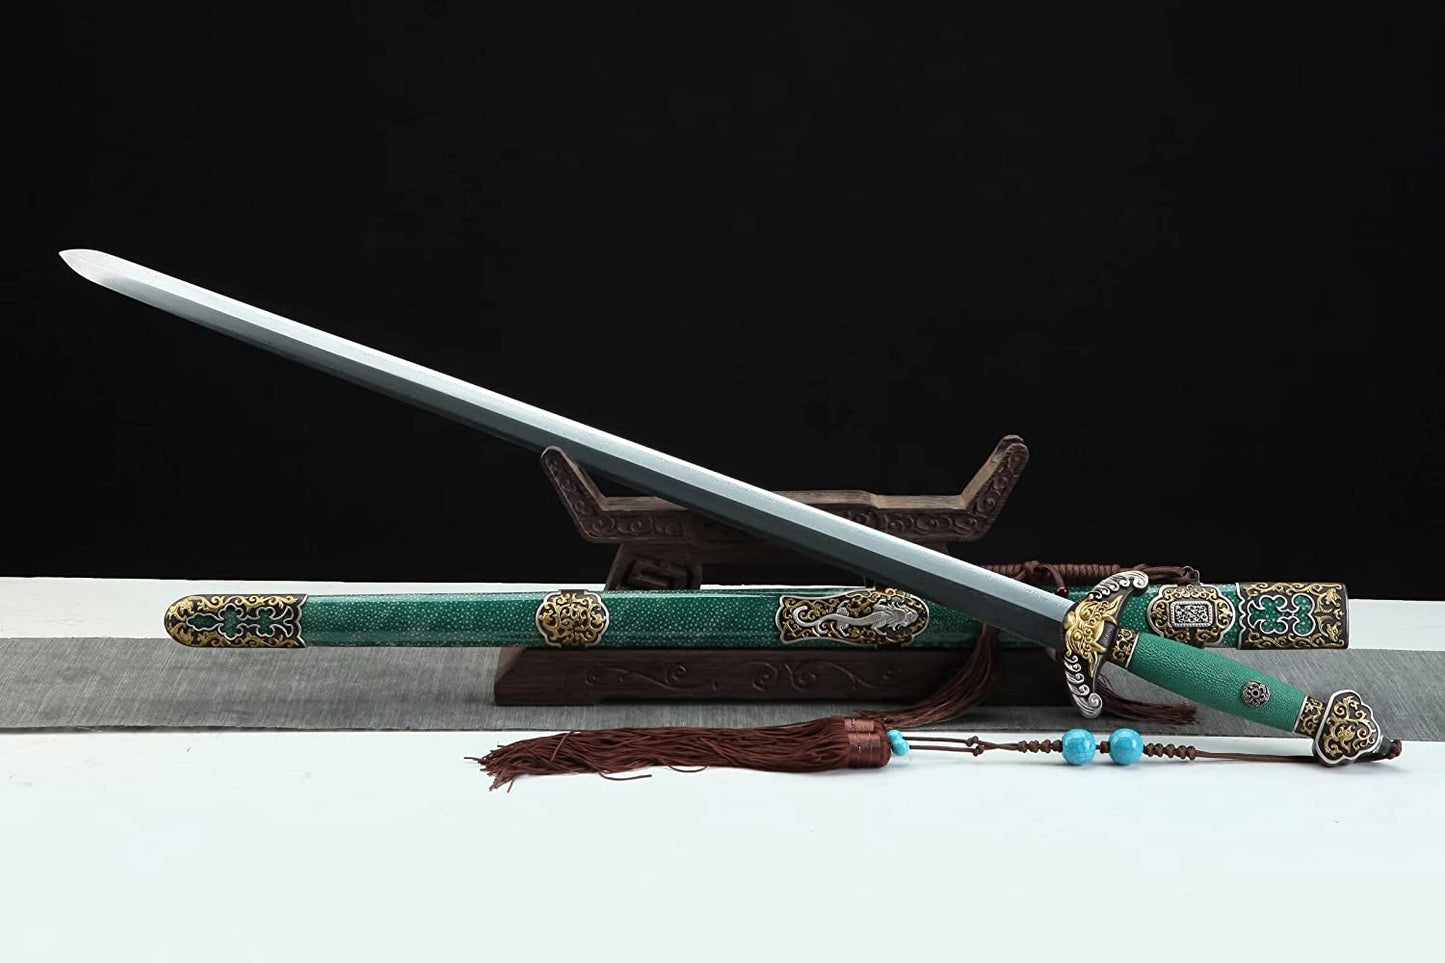 Qianlong Sabre,Forged Damascus Steel Blades,Green Skin Scabbard,Brass Fittings,chinese sword